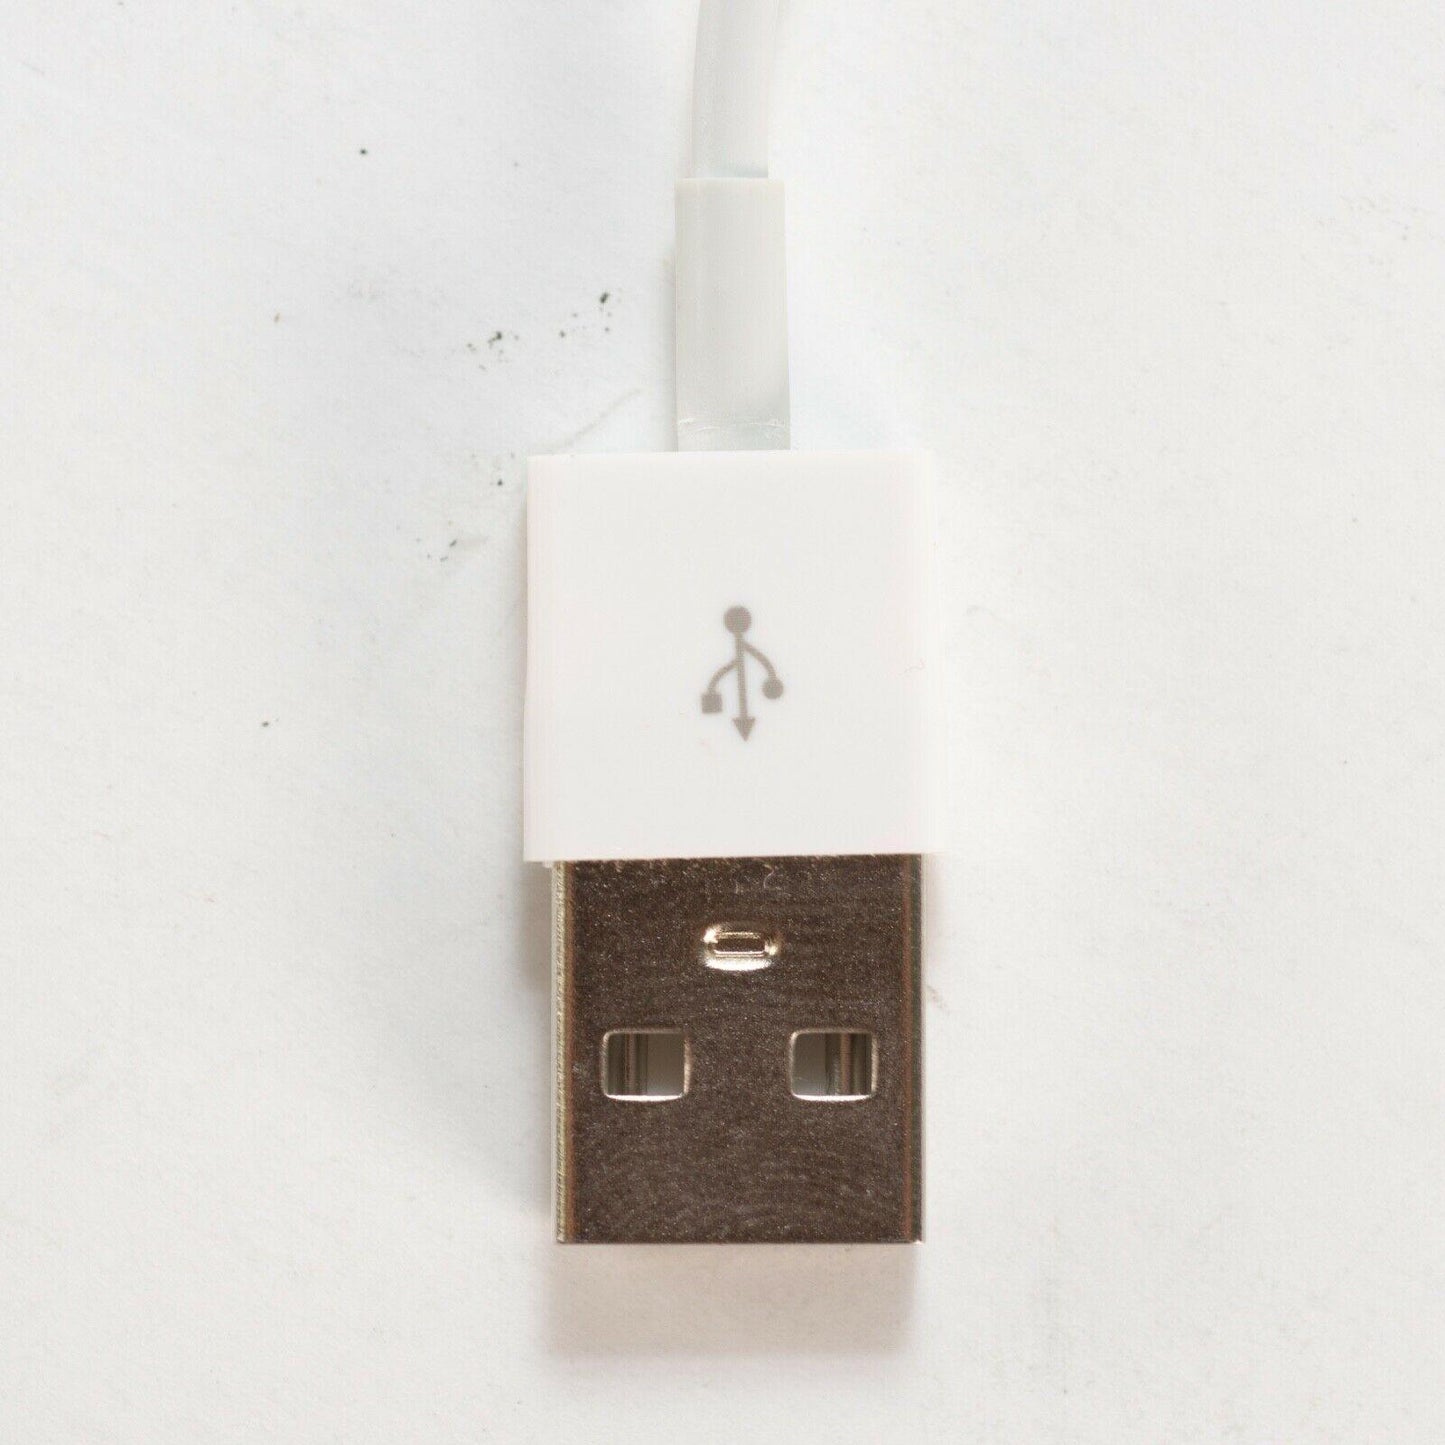 Generic Lighting to USB-A Cable - Works with iPhone, iPod, iPad - 3ft length - ipawnishop.com